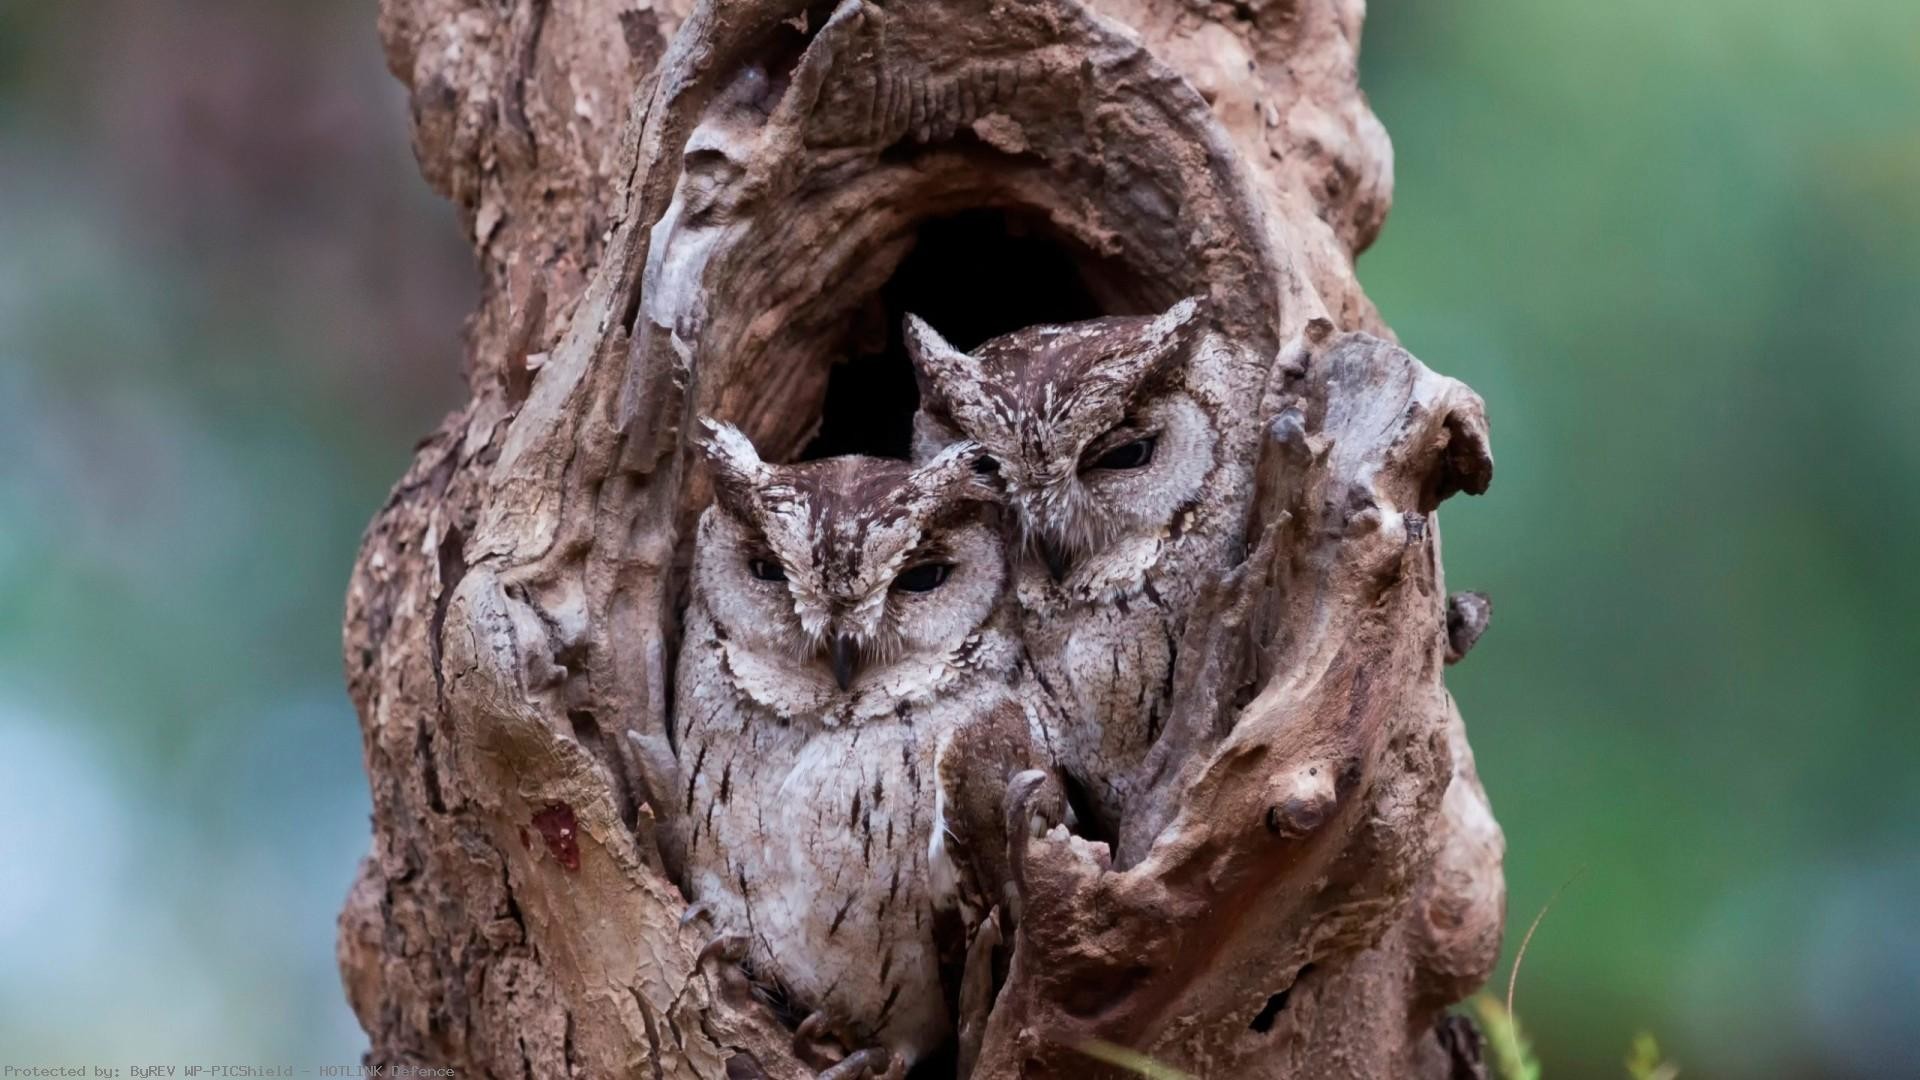 Two-Owl-in-Tree-1920-x-1080-Need-